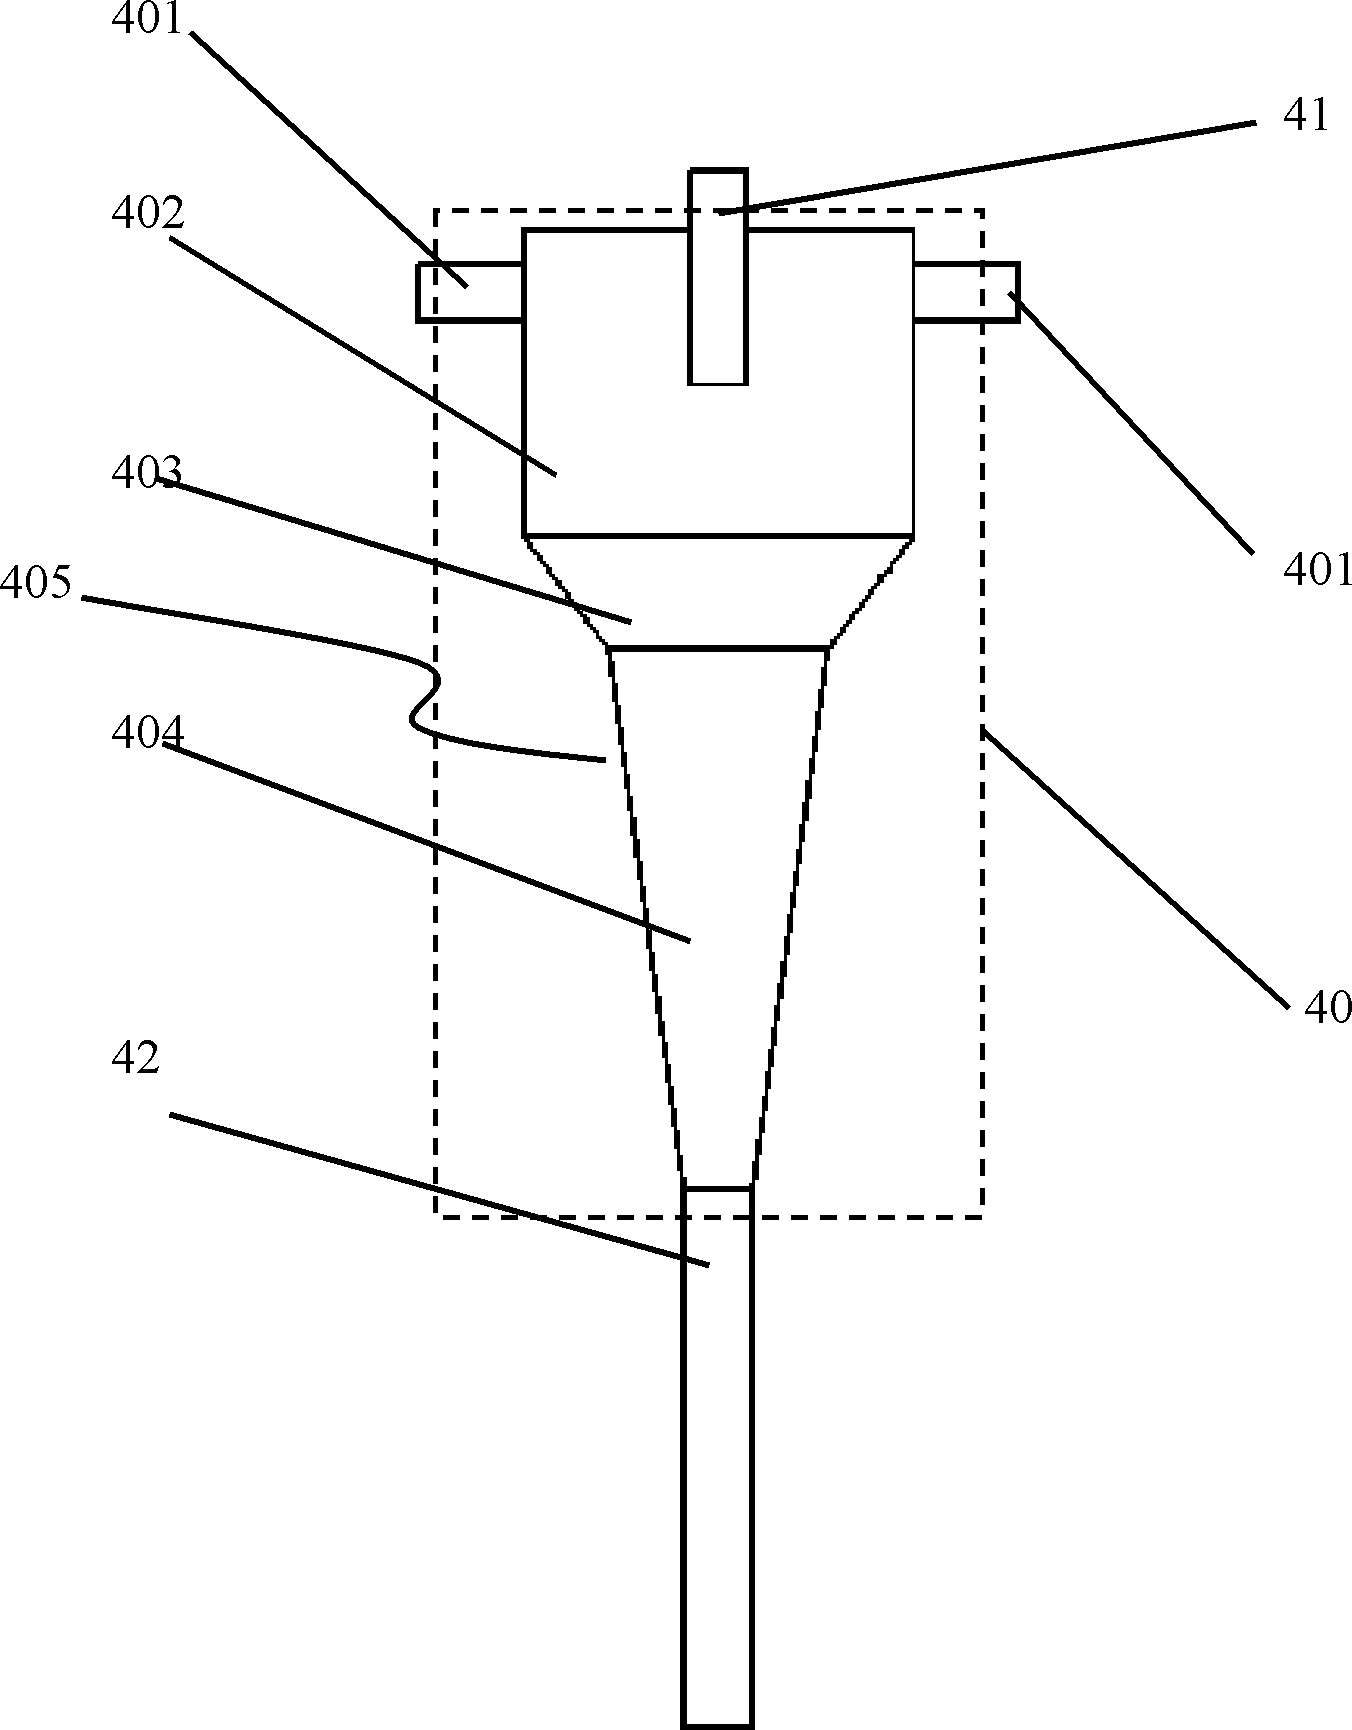 Treatment method and equipment for oilfield produced water